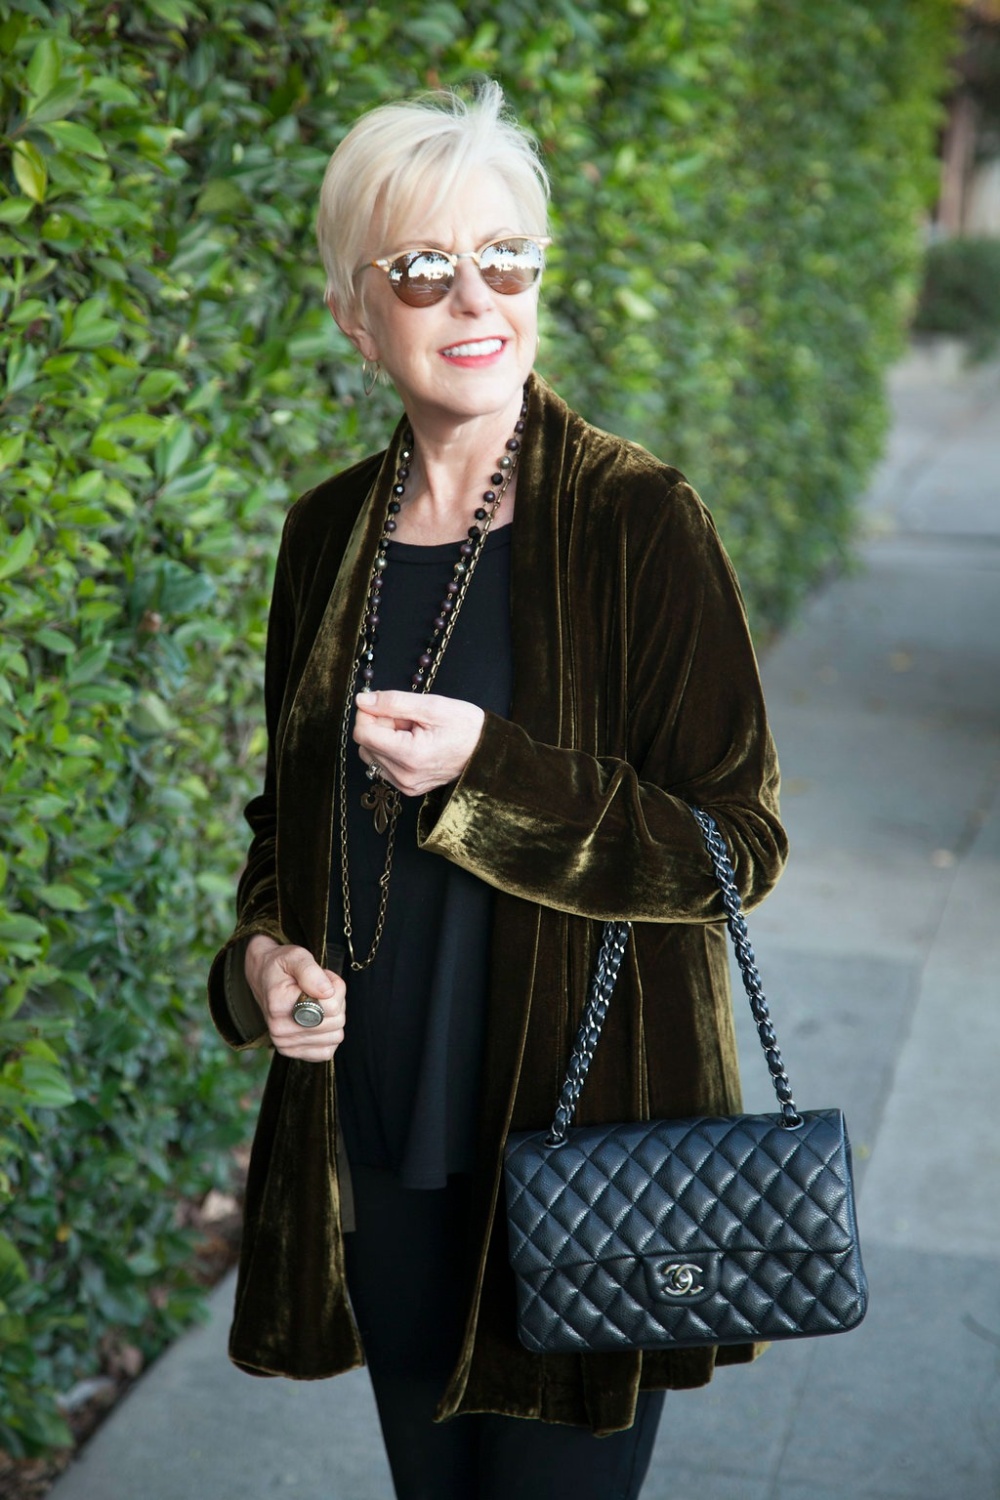 Casual glam with a green velvet jacket and Chanel classic flap bag. Details at une femme d'un certain age.